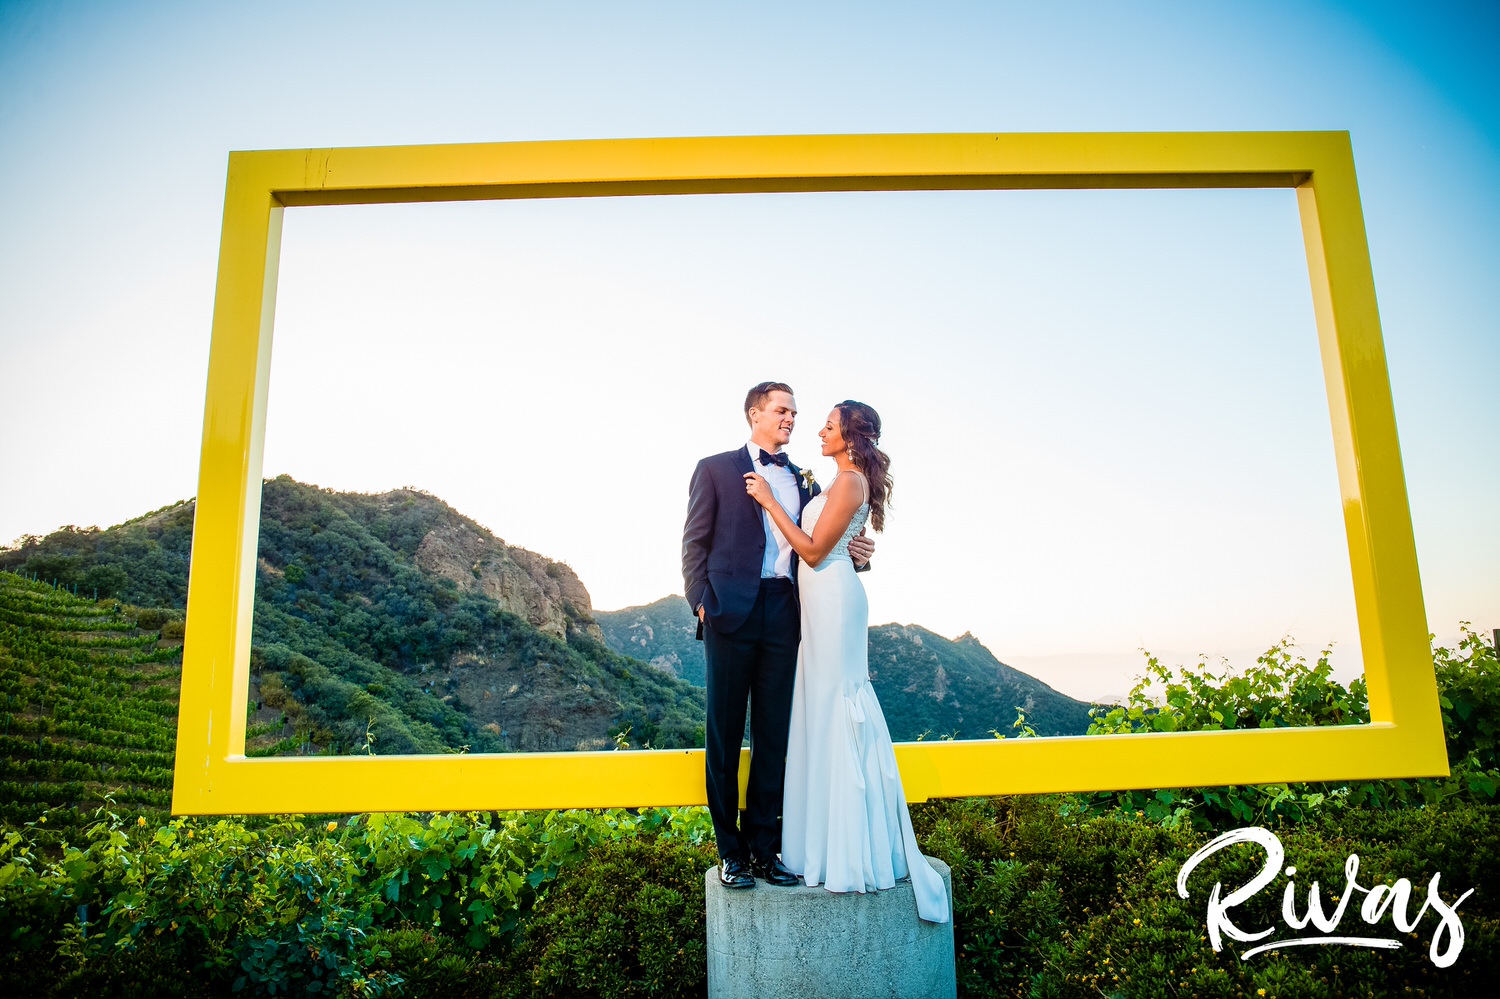 Saddlerock Ranch Summer Wedding | Destination Wedding Photographers | Rivas | A photo of a bride and groom sharing an embrace on their wedding day in front of the iconic yellow frame at Saddlerock Ranch in Malibu, California. 